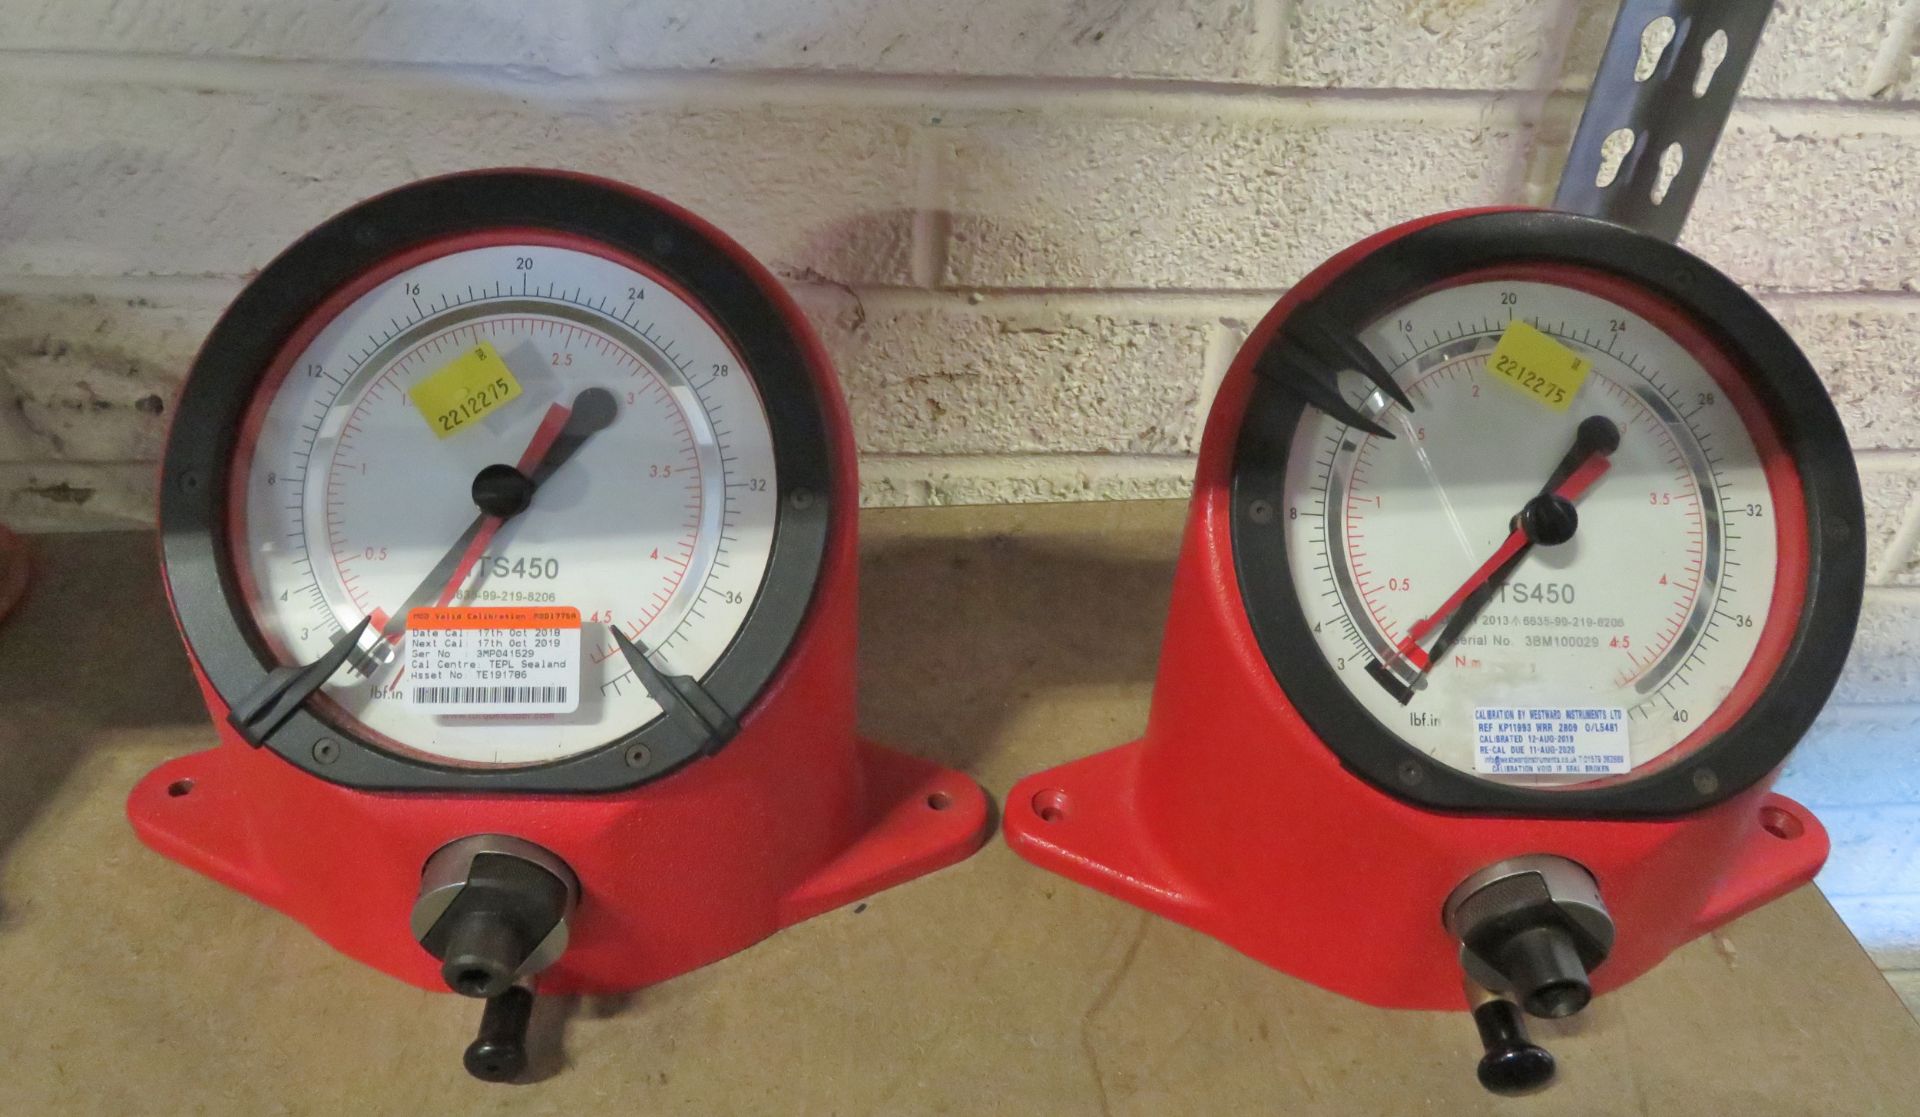 2x Torque Leader MTS450 Torque Wrench Testers